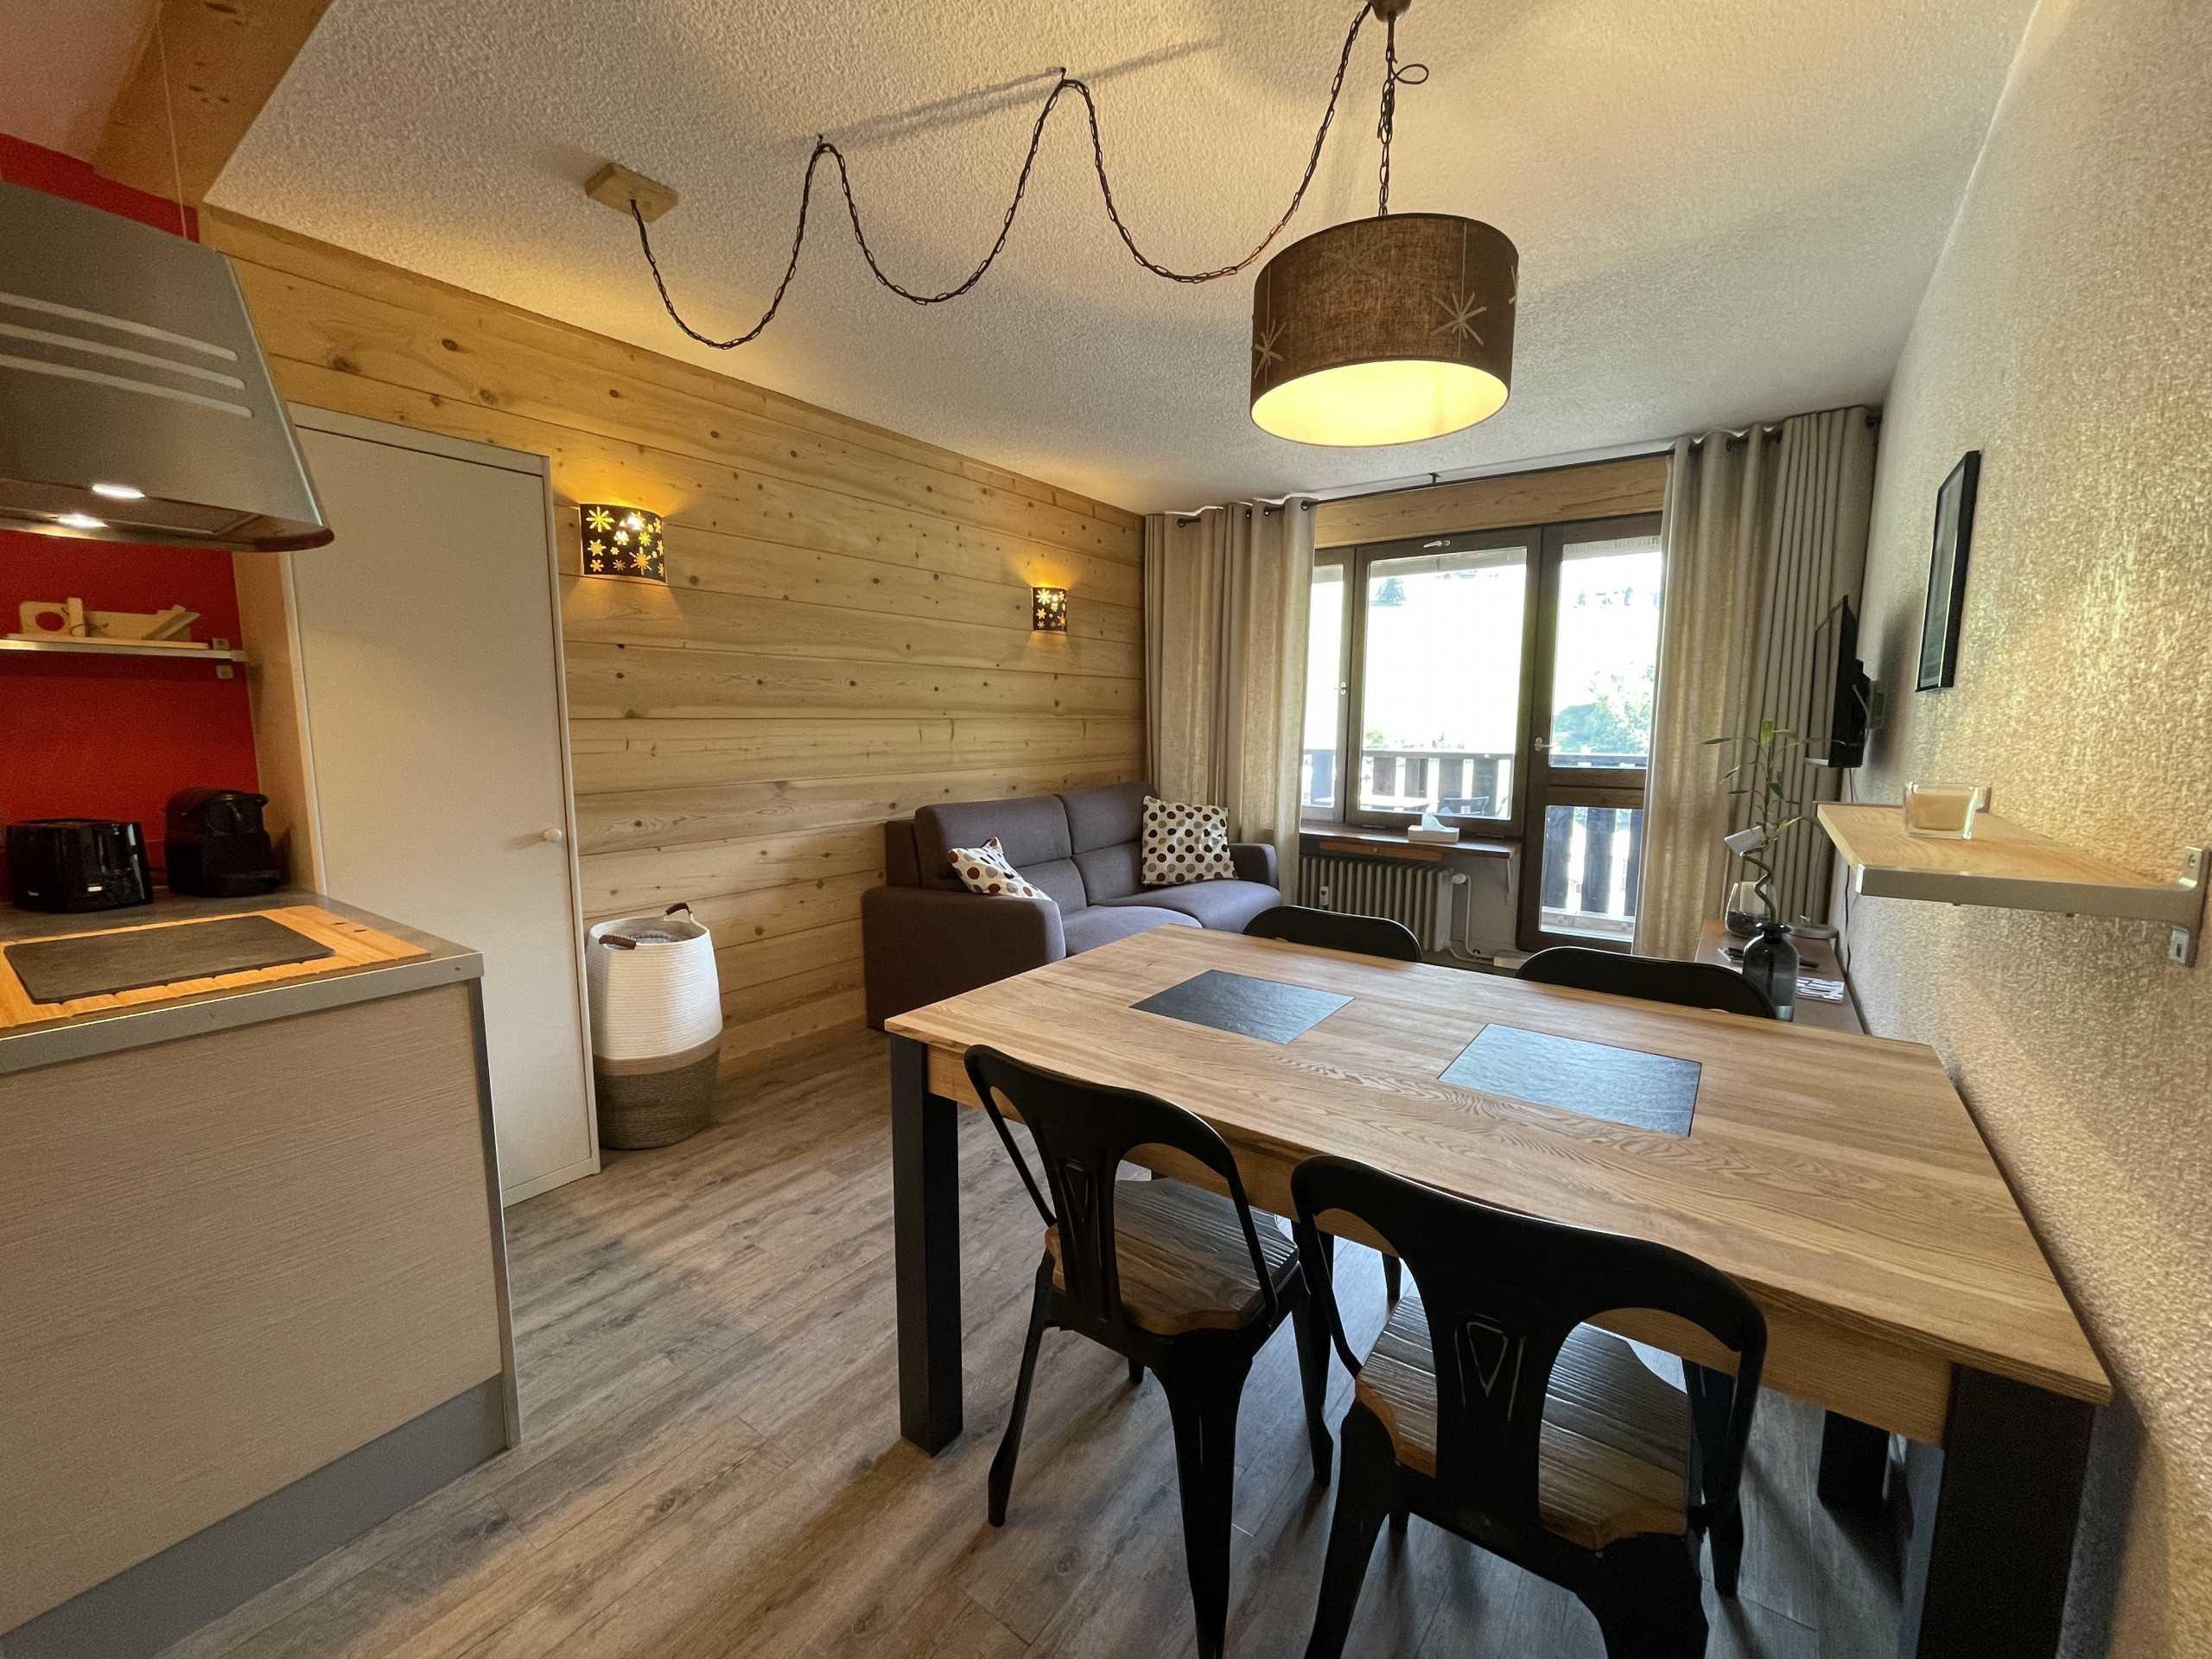  in La Clusaz - Ours Blanc 11 - Studio 4 pers. 3* nice view